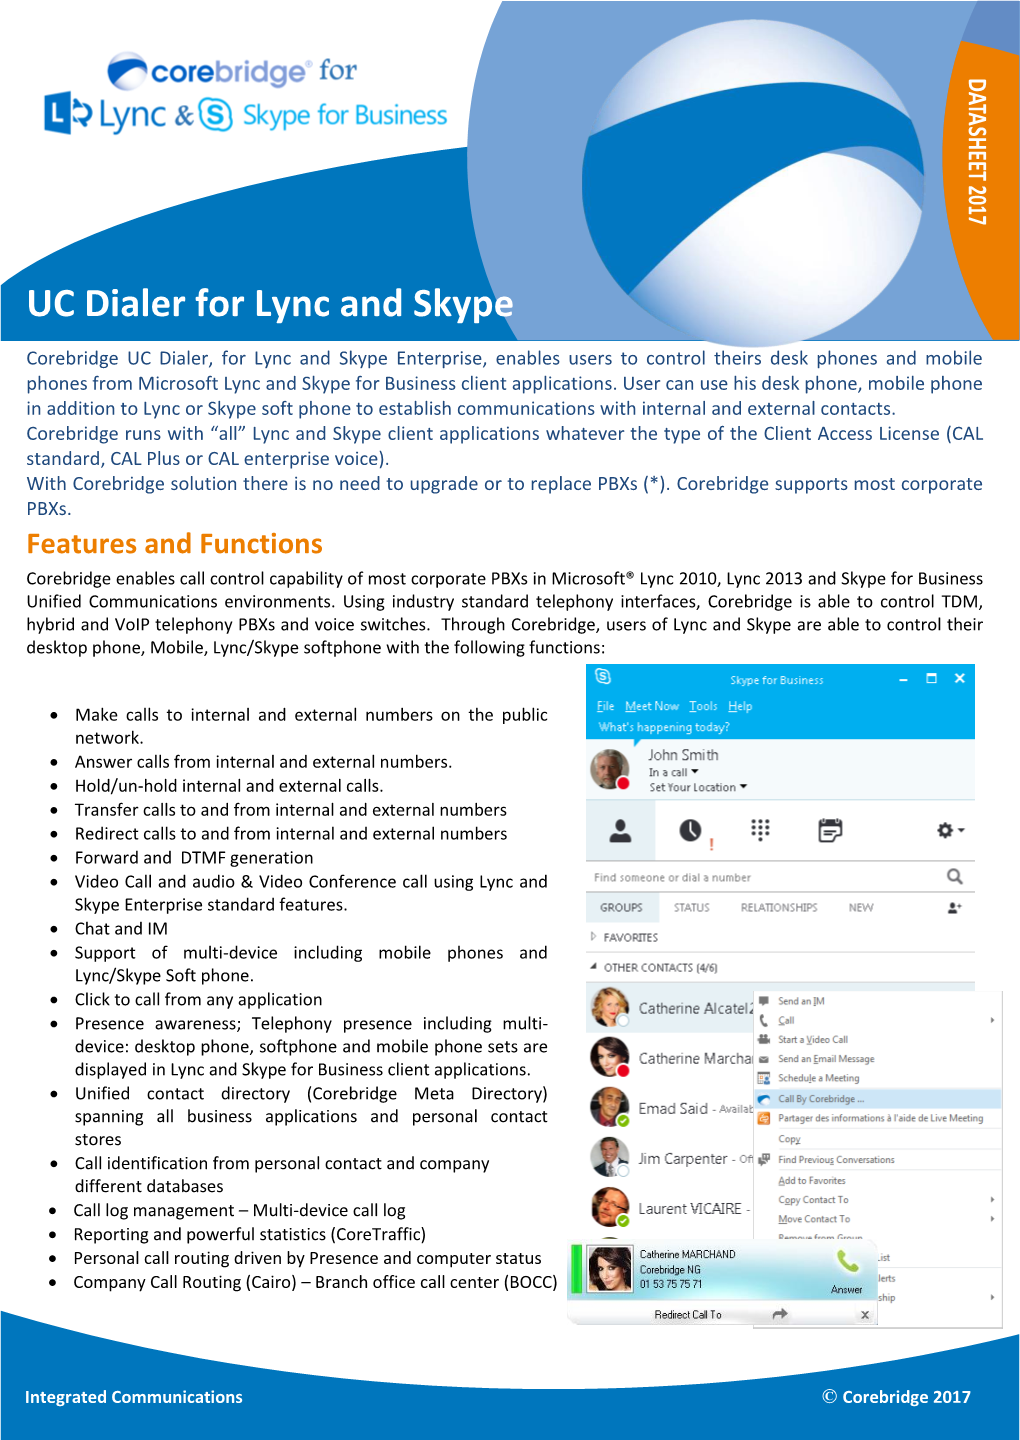 UC Dialer for Lync and Skype